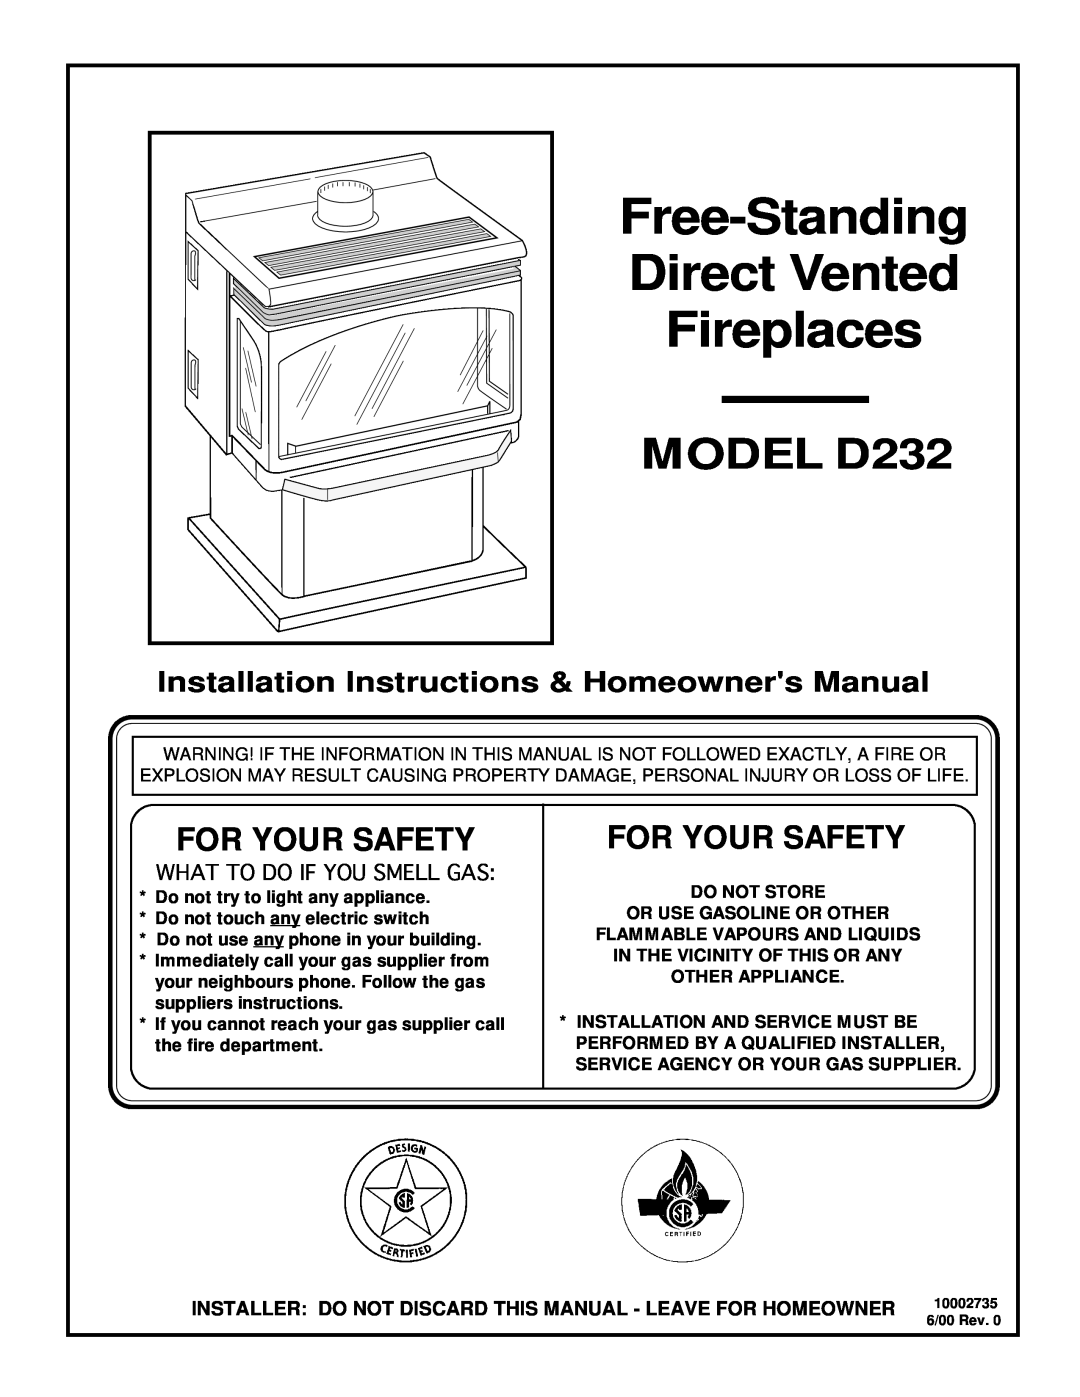 Vermont Casting installation instructions Free-Standing Direct Vented Fireplaces, MODEL D232, For Your Safety 